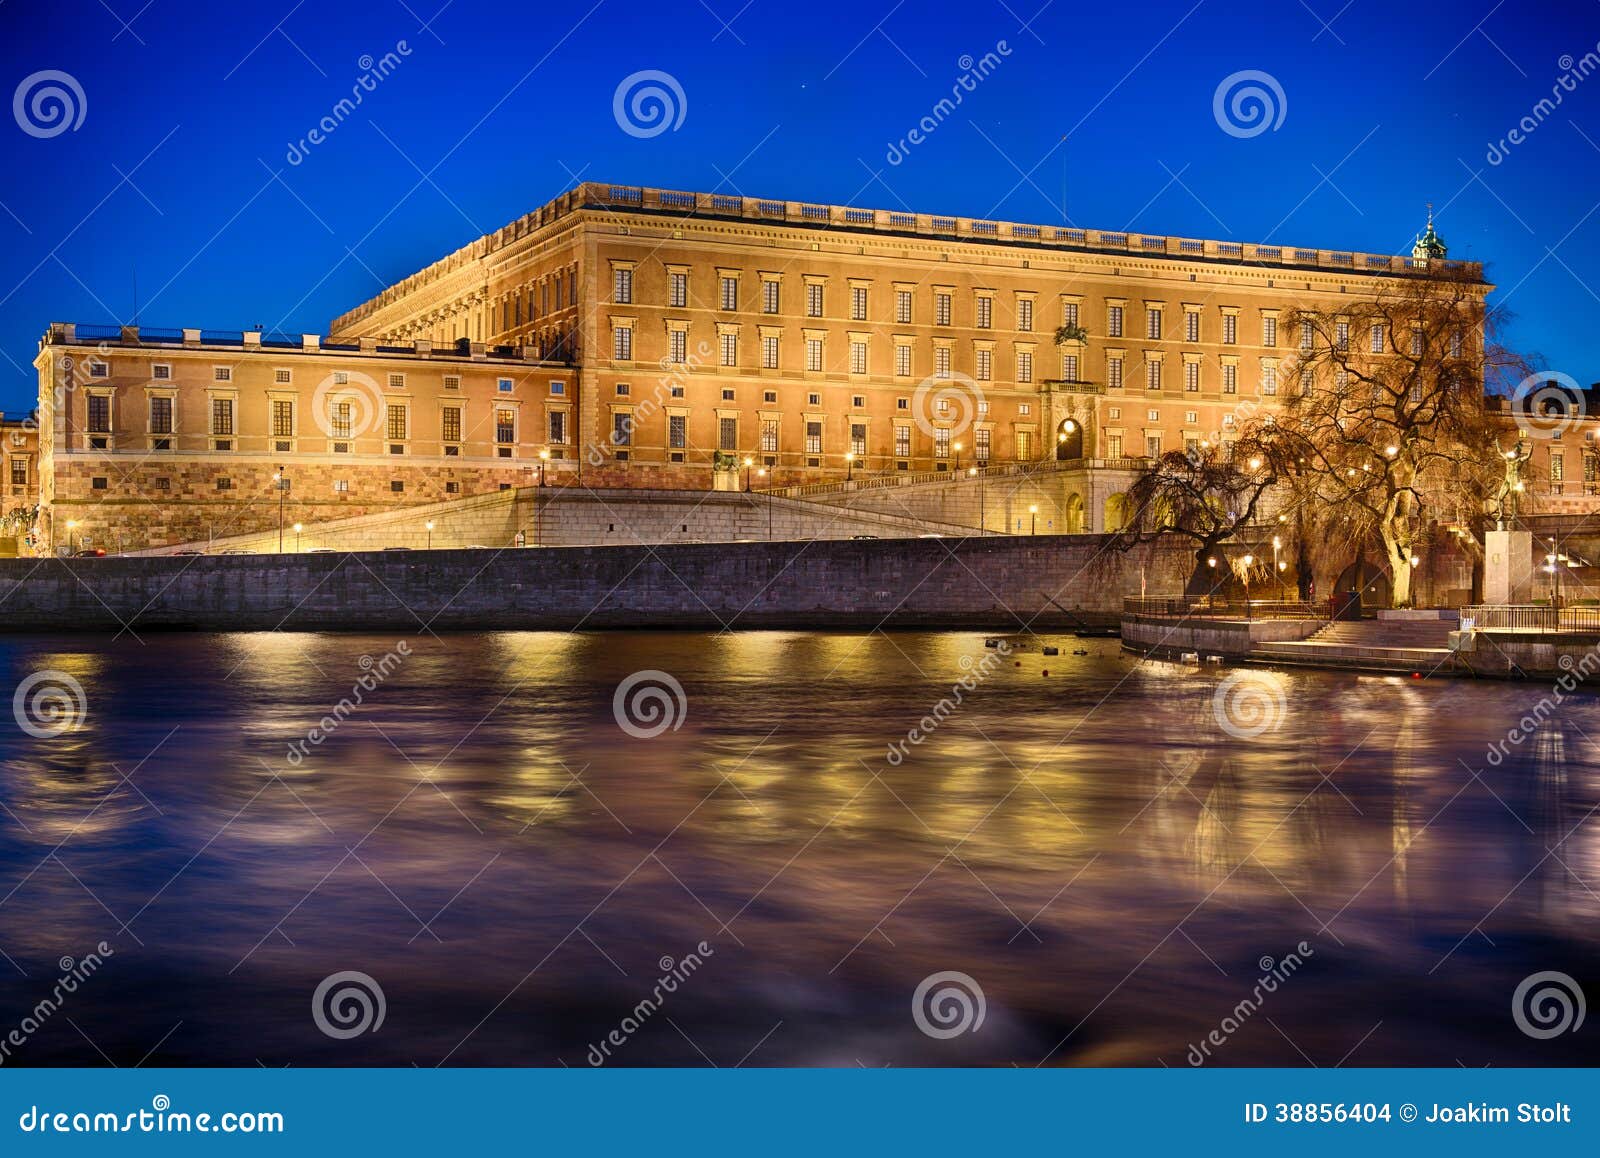 swedish royal palace in stockholm by night